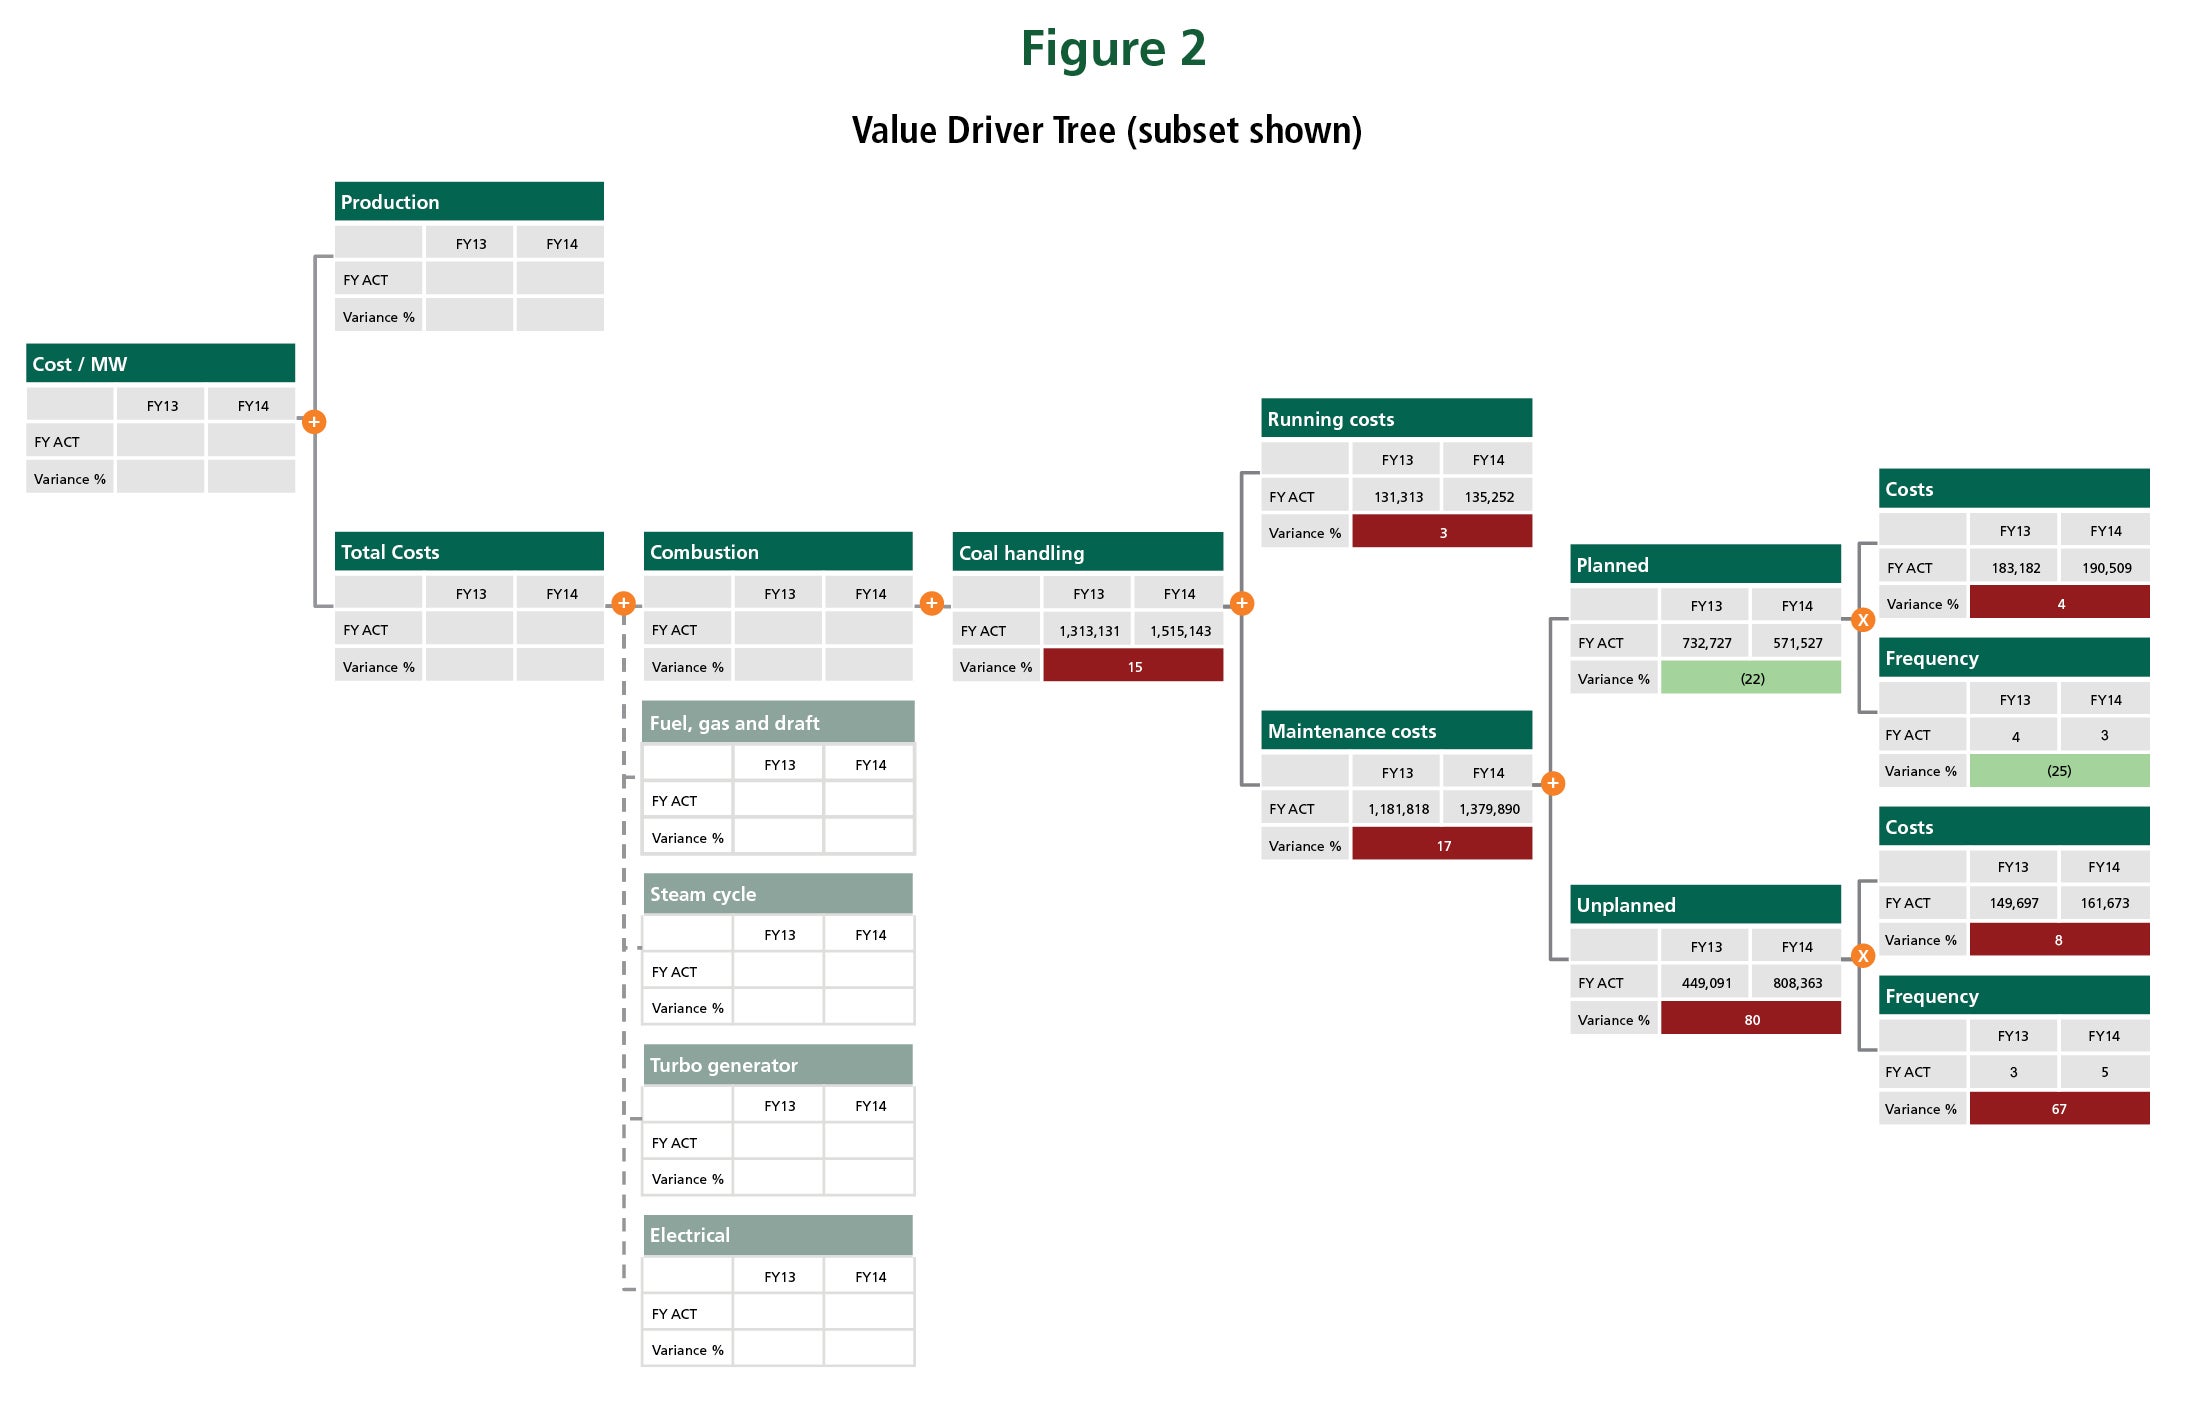 Value Driver Tree (subset shown)